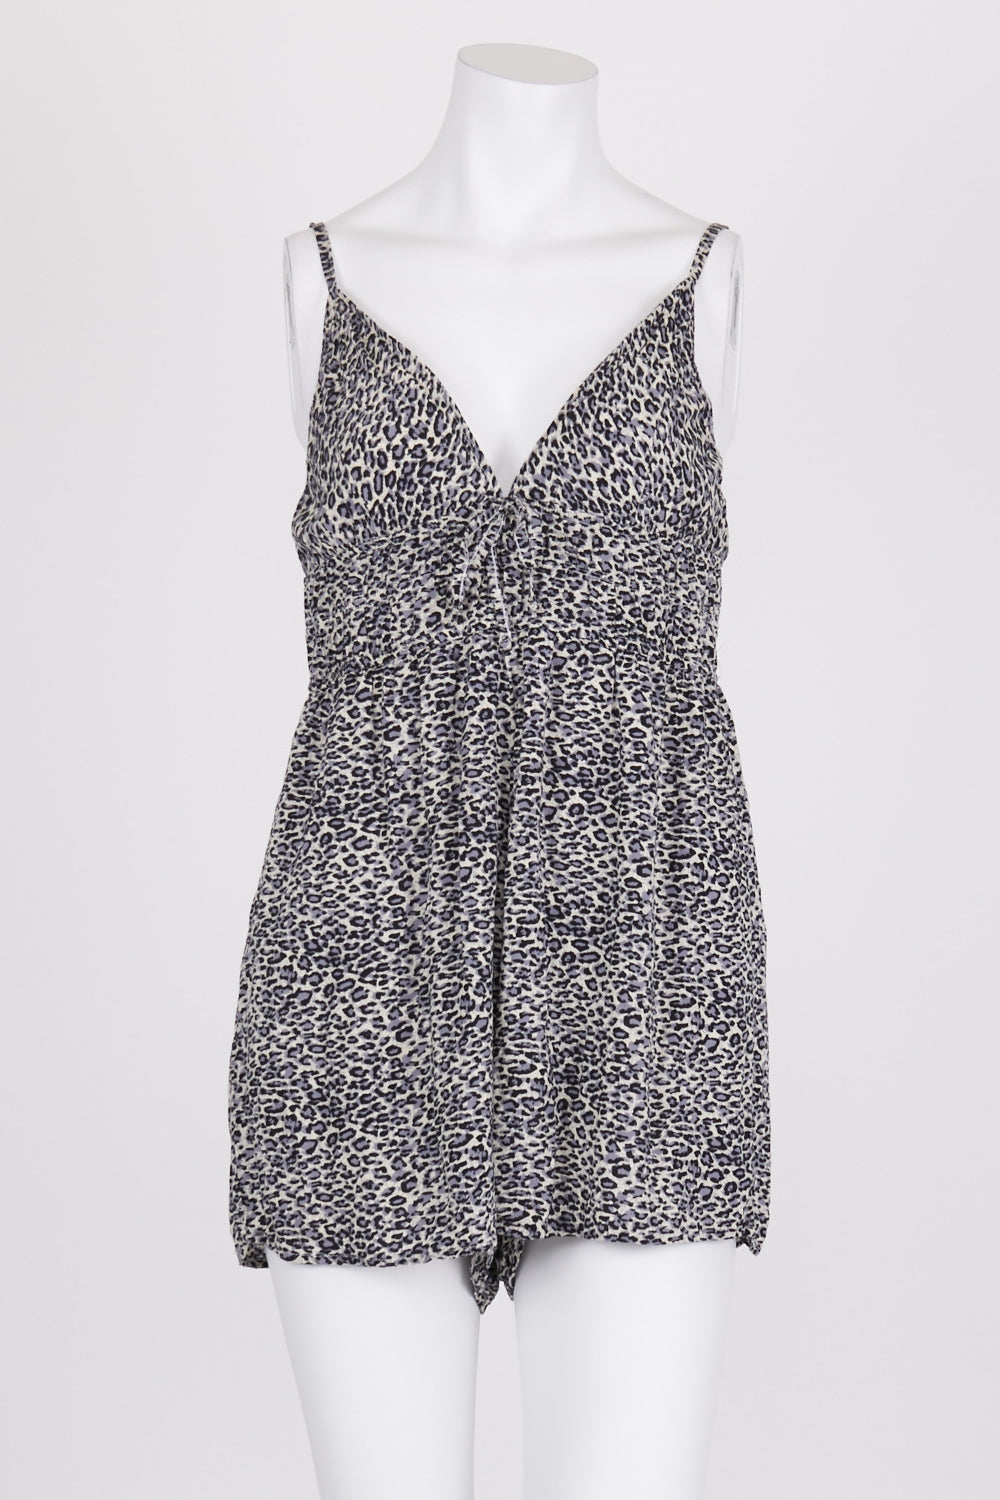 All About Eve Leopard Print Playsuit 10